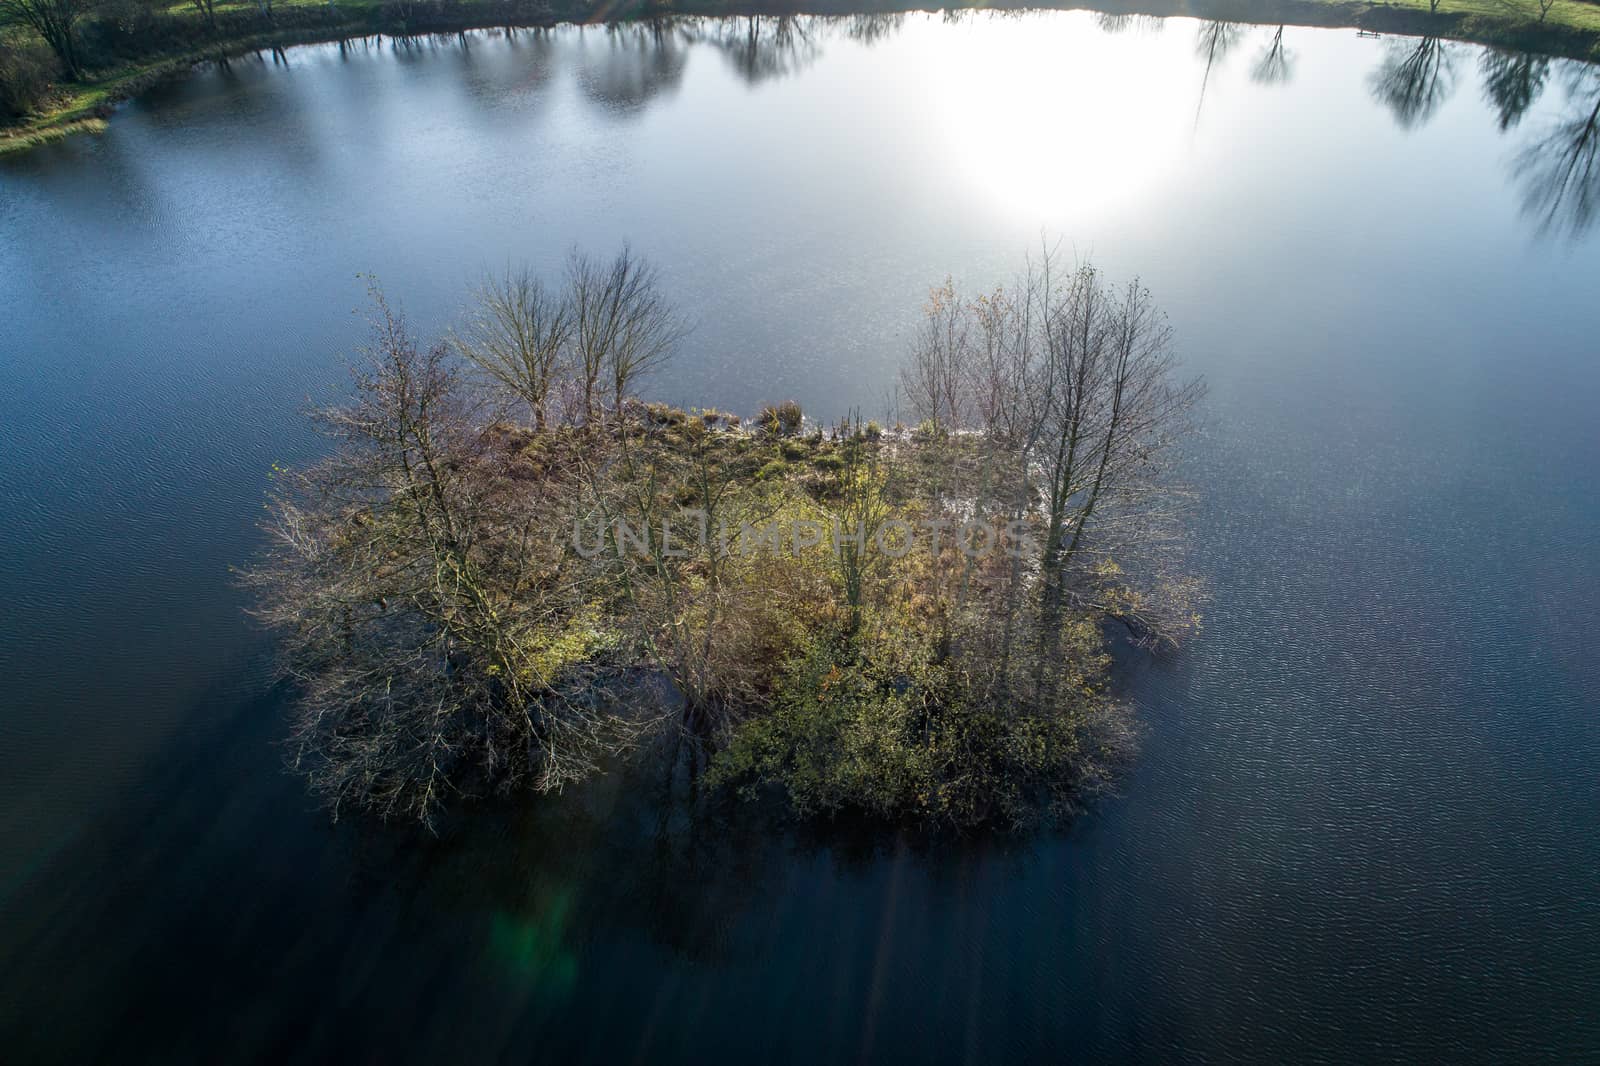 Small island in a pond, backlit with reflections of the sun in t by geogif